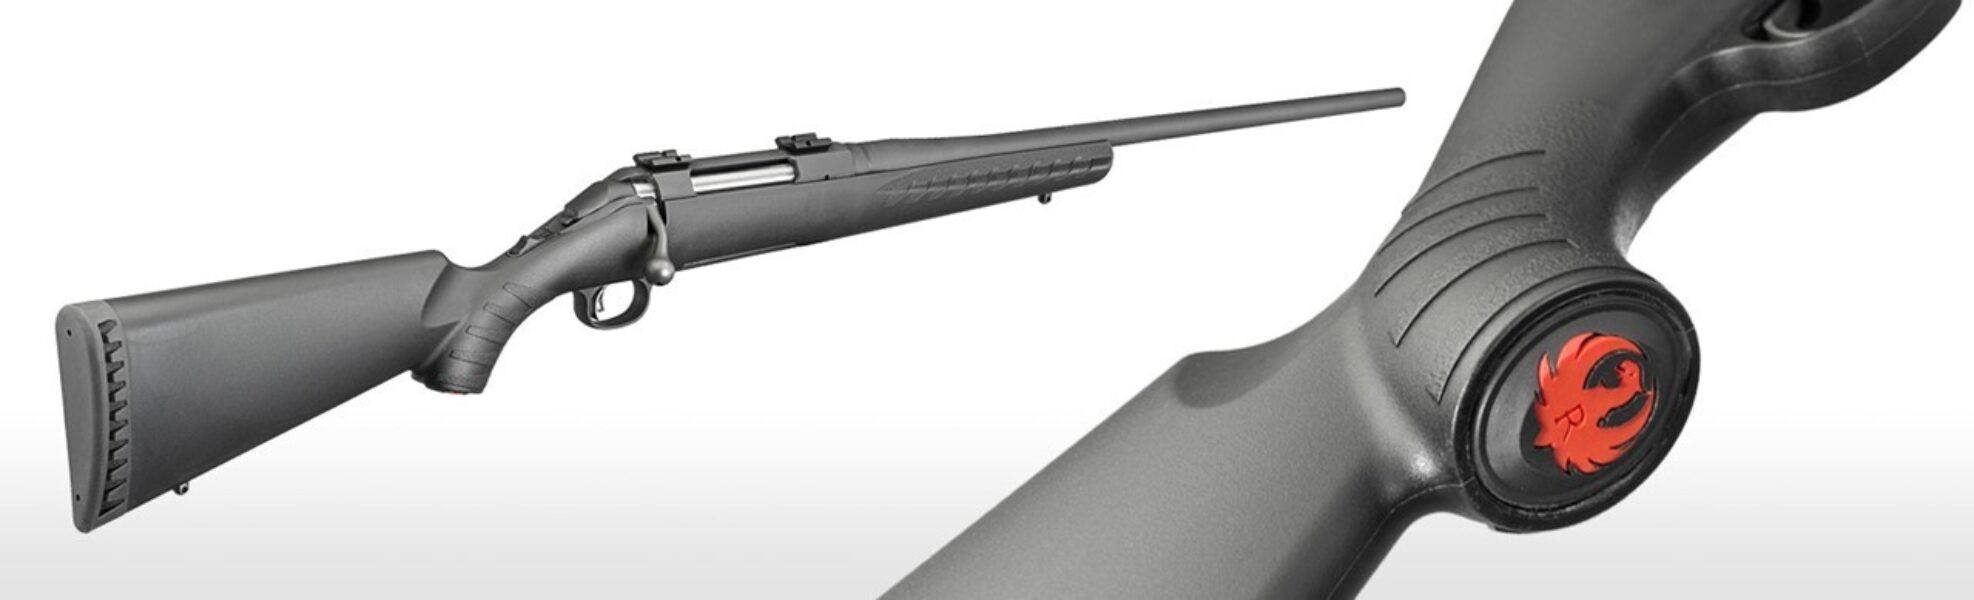 Ruger american rifle